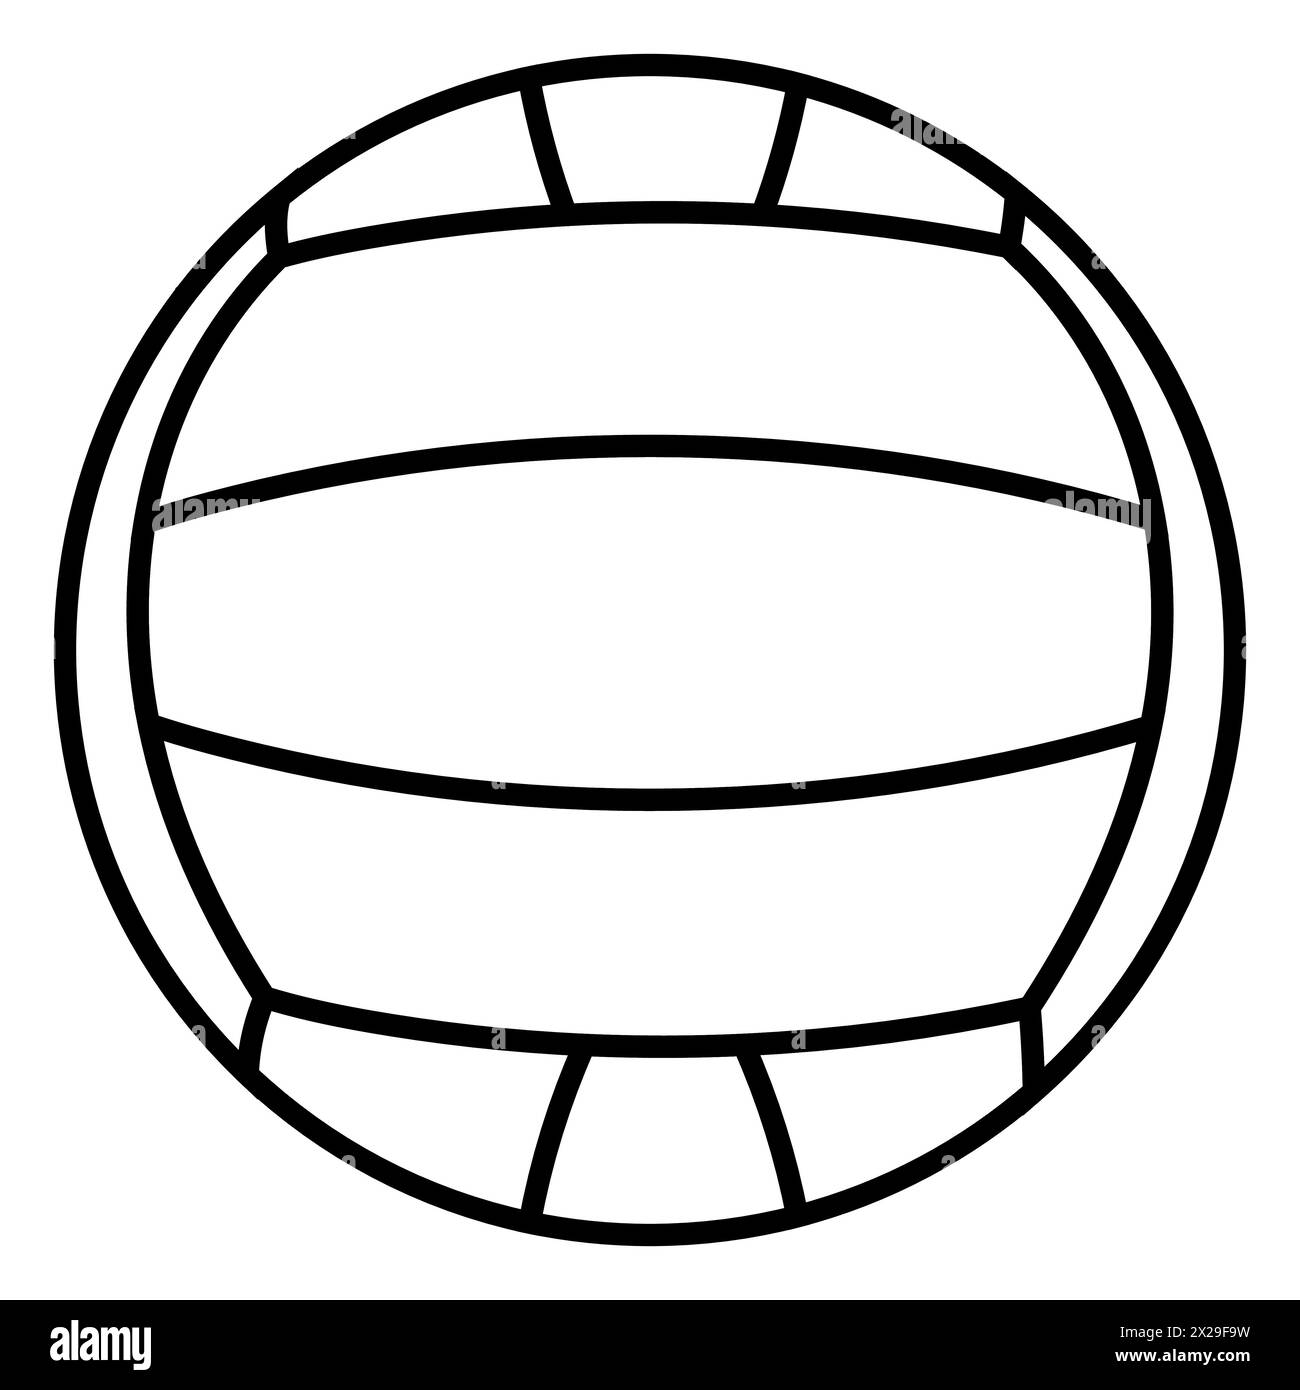 Volleyball ball line art icon for sports apps and website, flat design Stock Vector